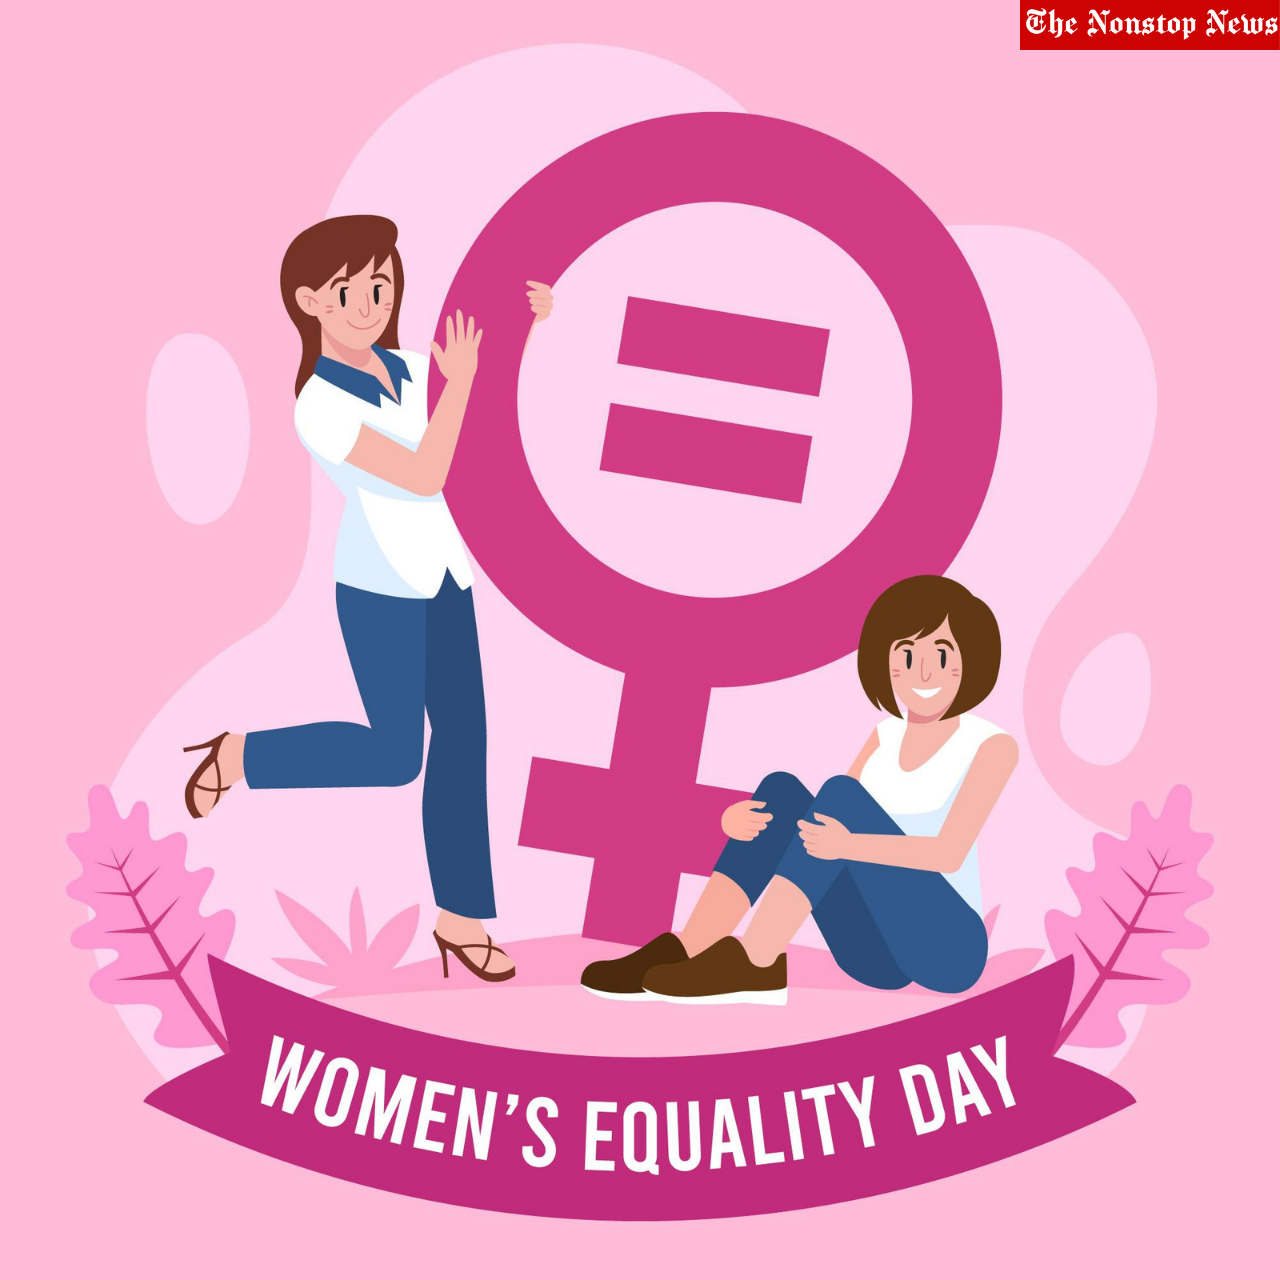 Women's Equality Day 2021 Theme, Quotes, Wishes, Images, Messages, Greetings, and HD Images for the Anniversary of 19th Amendment giving women the right to vote